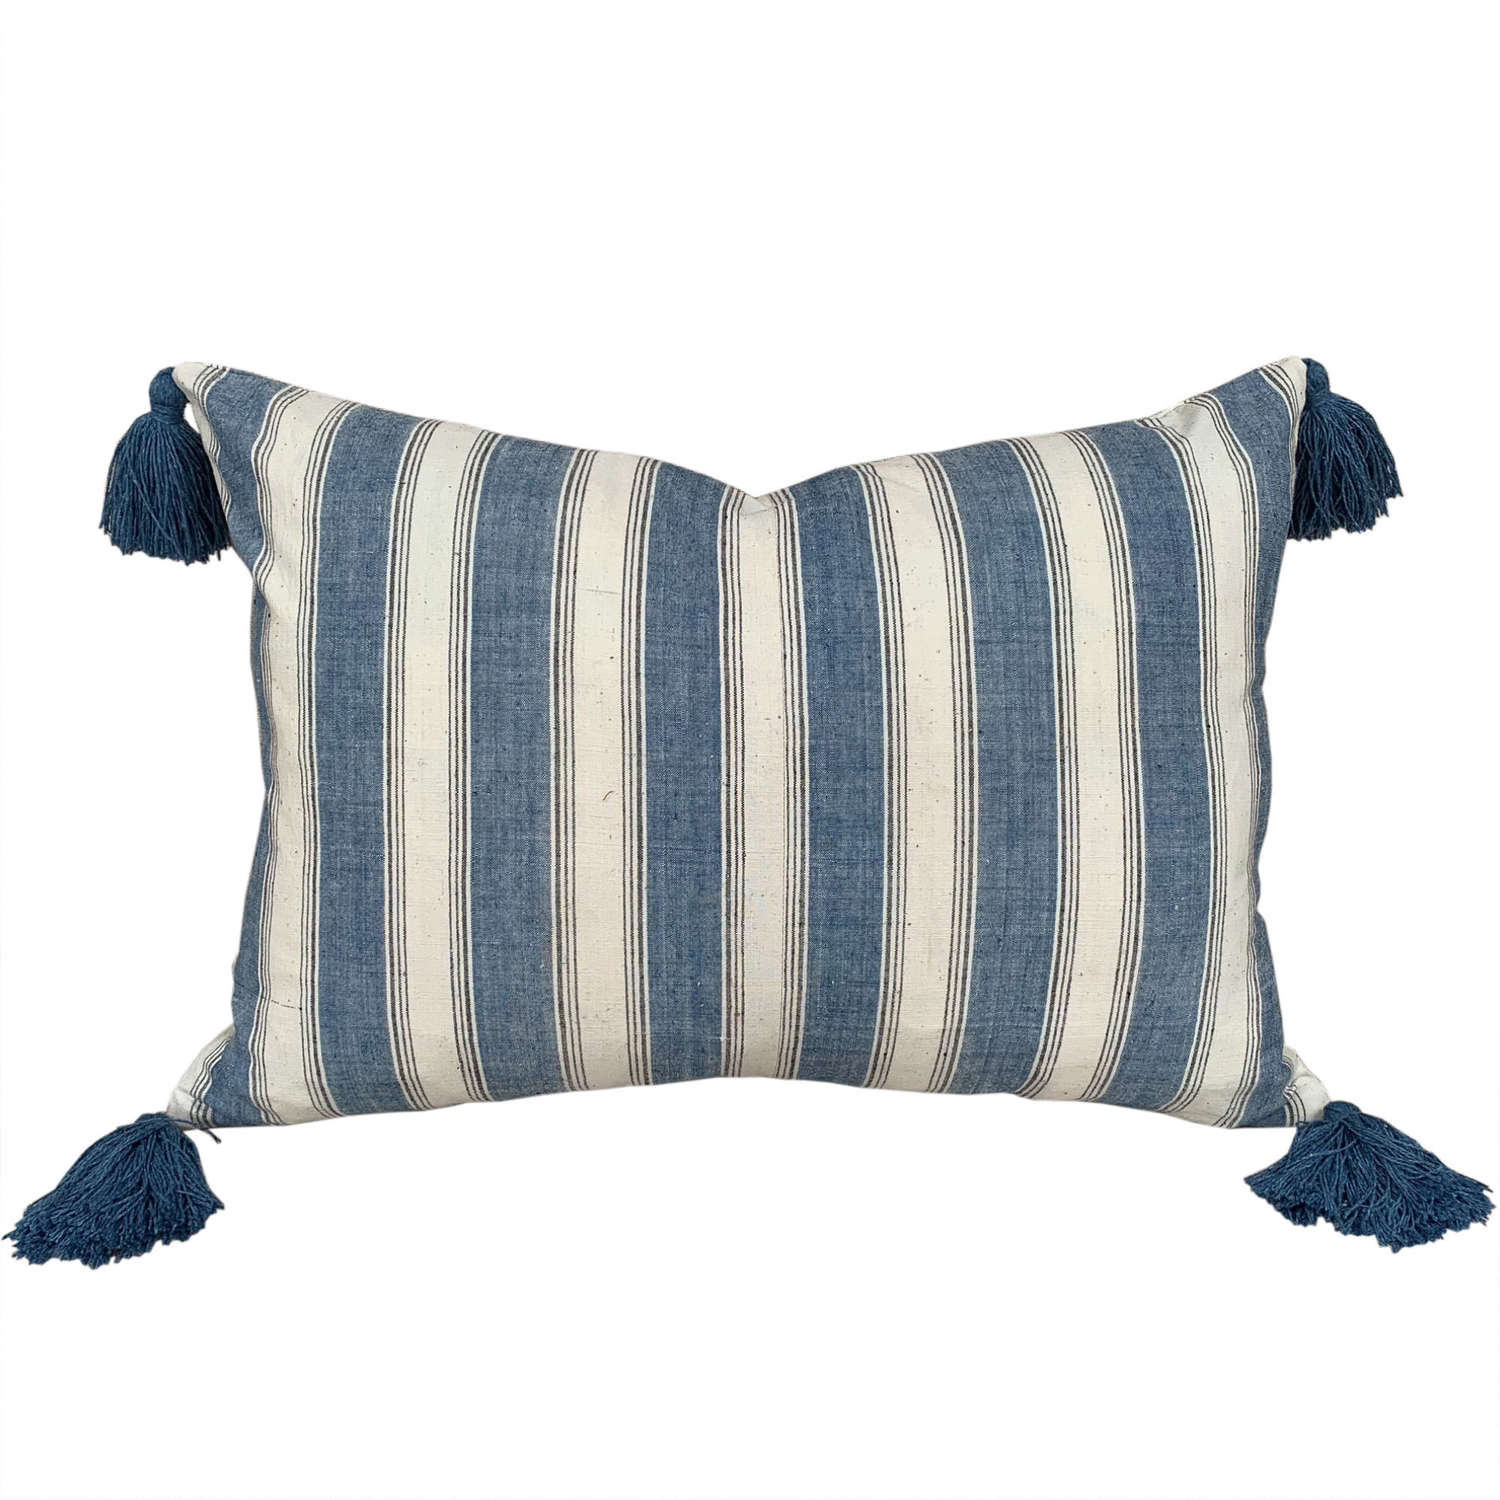 Songjiang Blue And White Cushions With Tassels